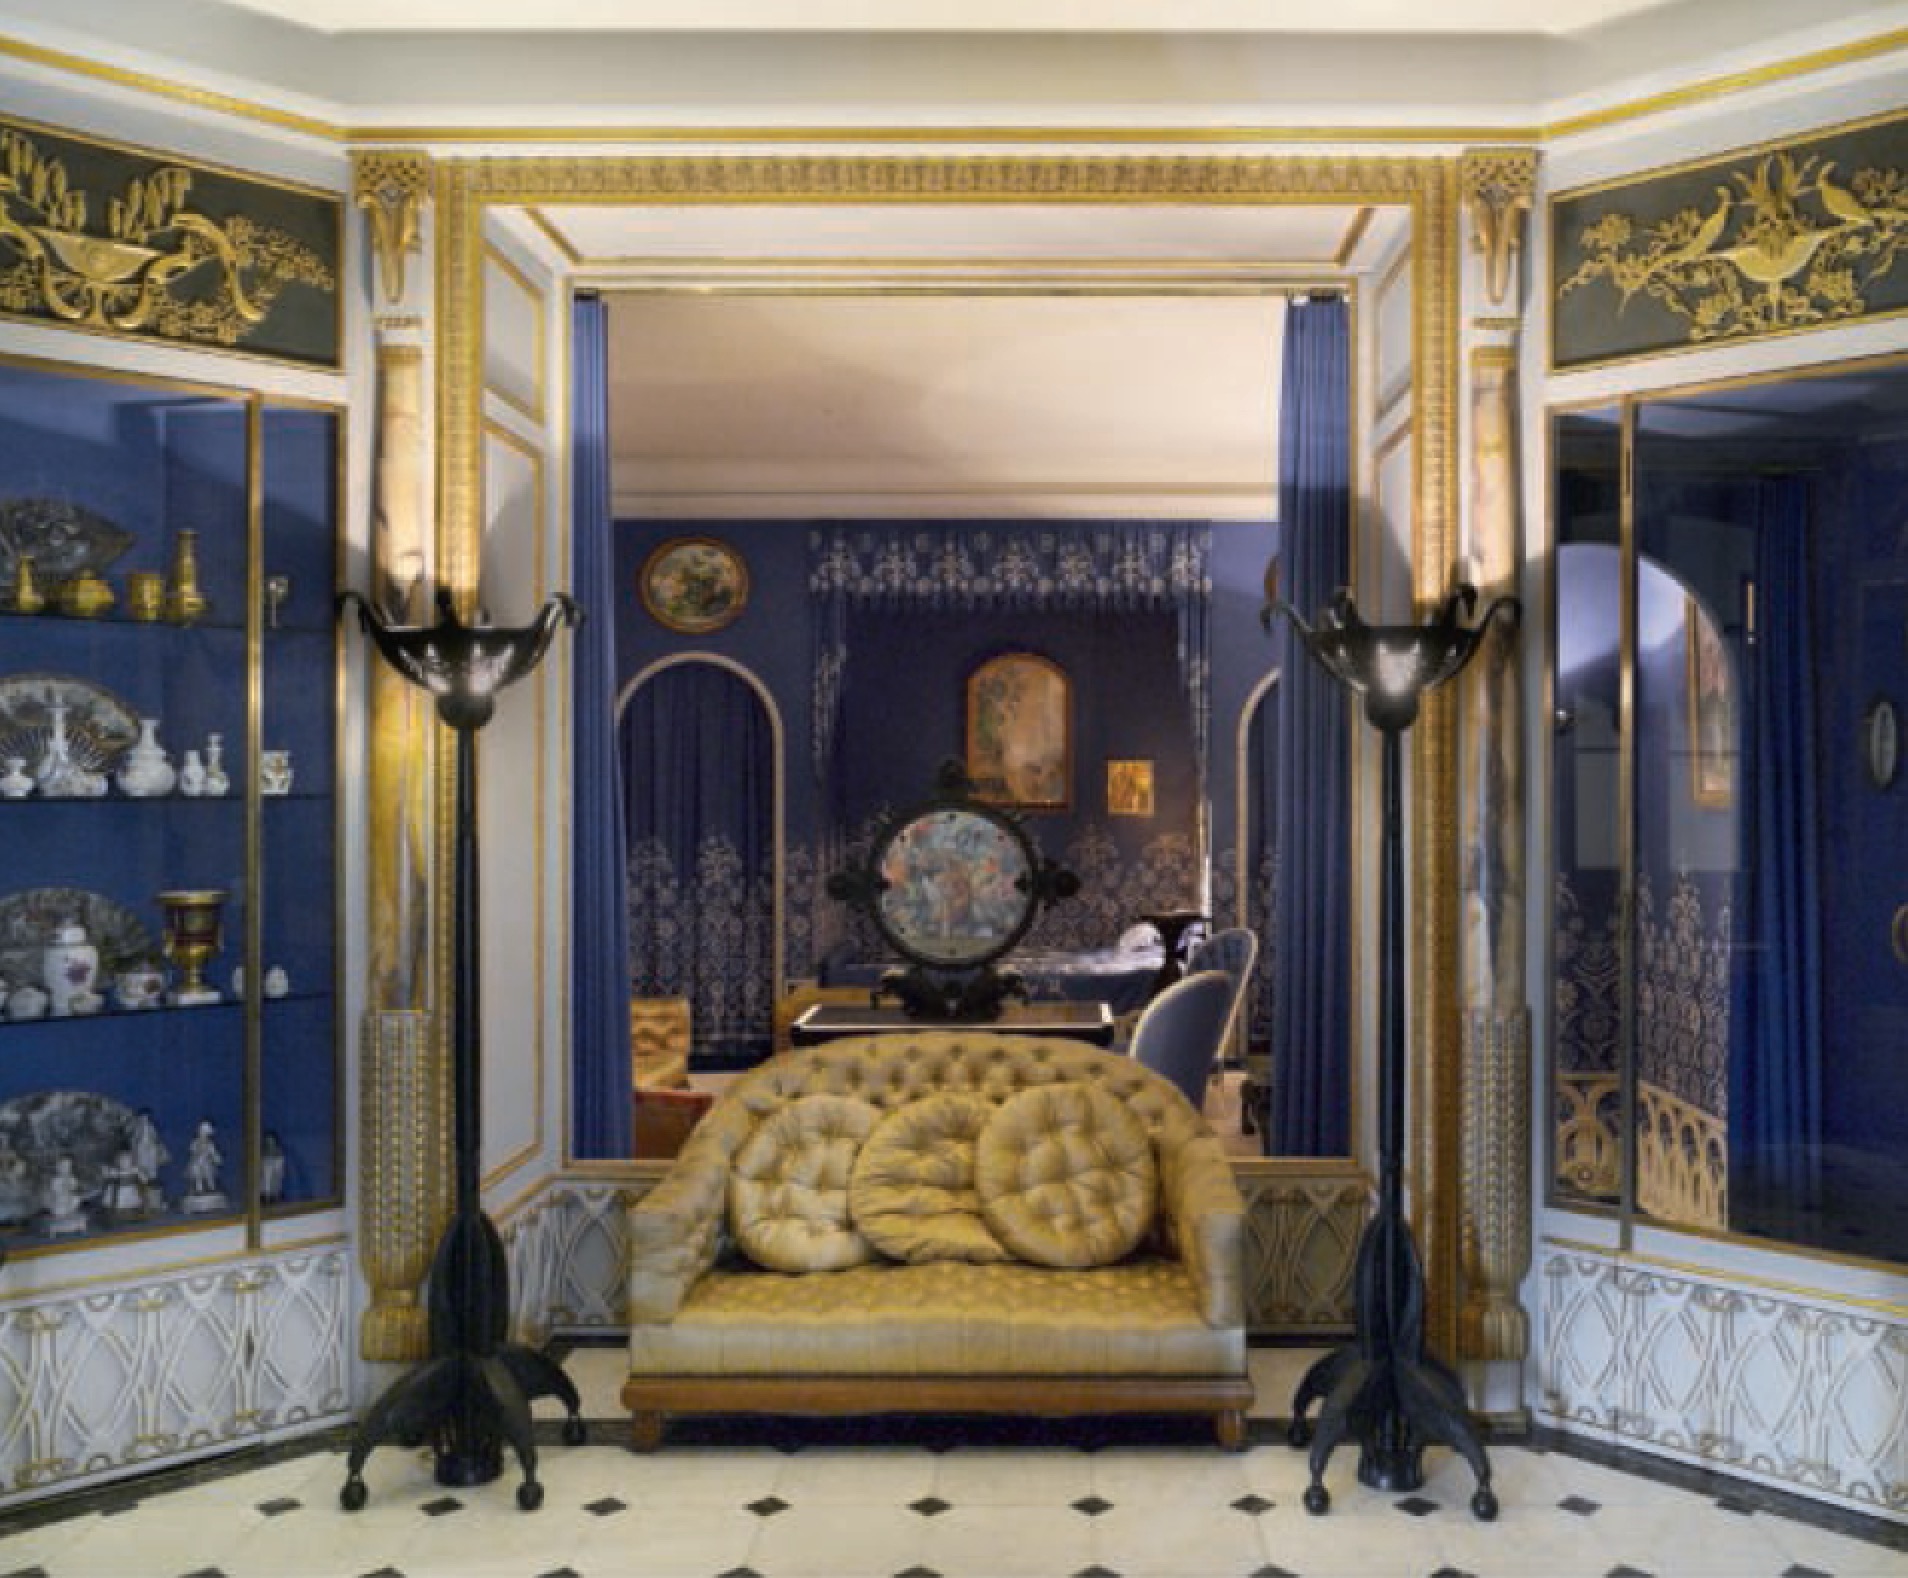 Lanvin Residence, Designed by Armand-Albert Rateau, Paris - as featured in Interiors: the Greatest Rooms of the Century